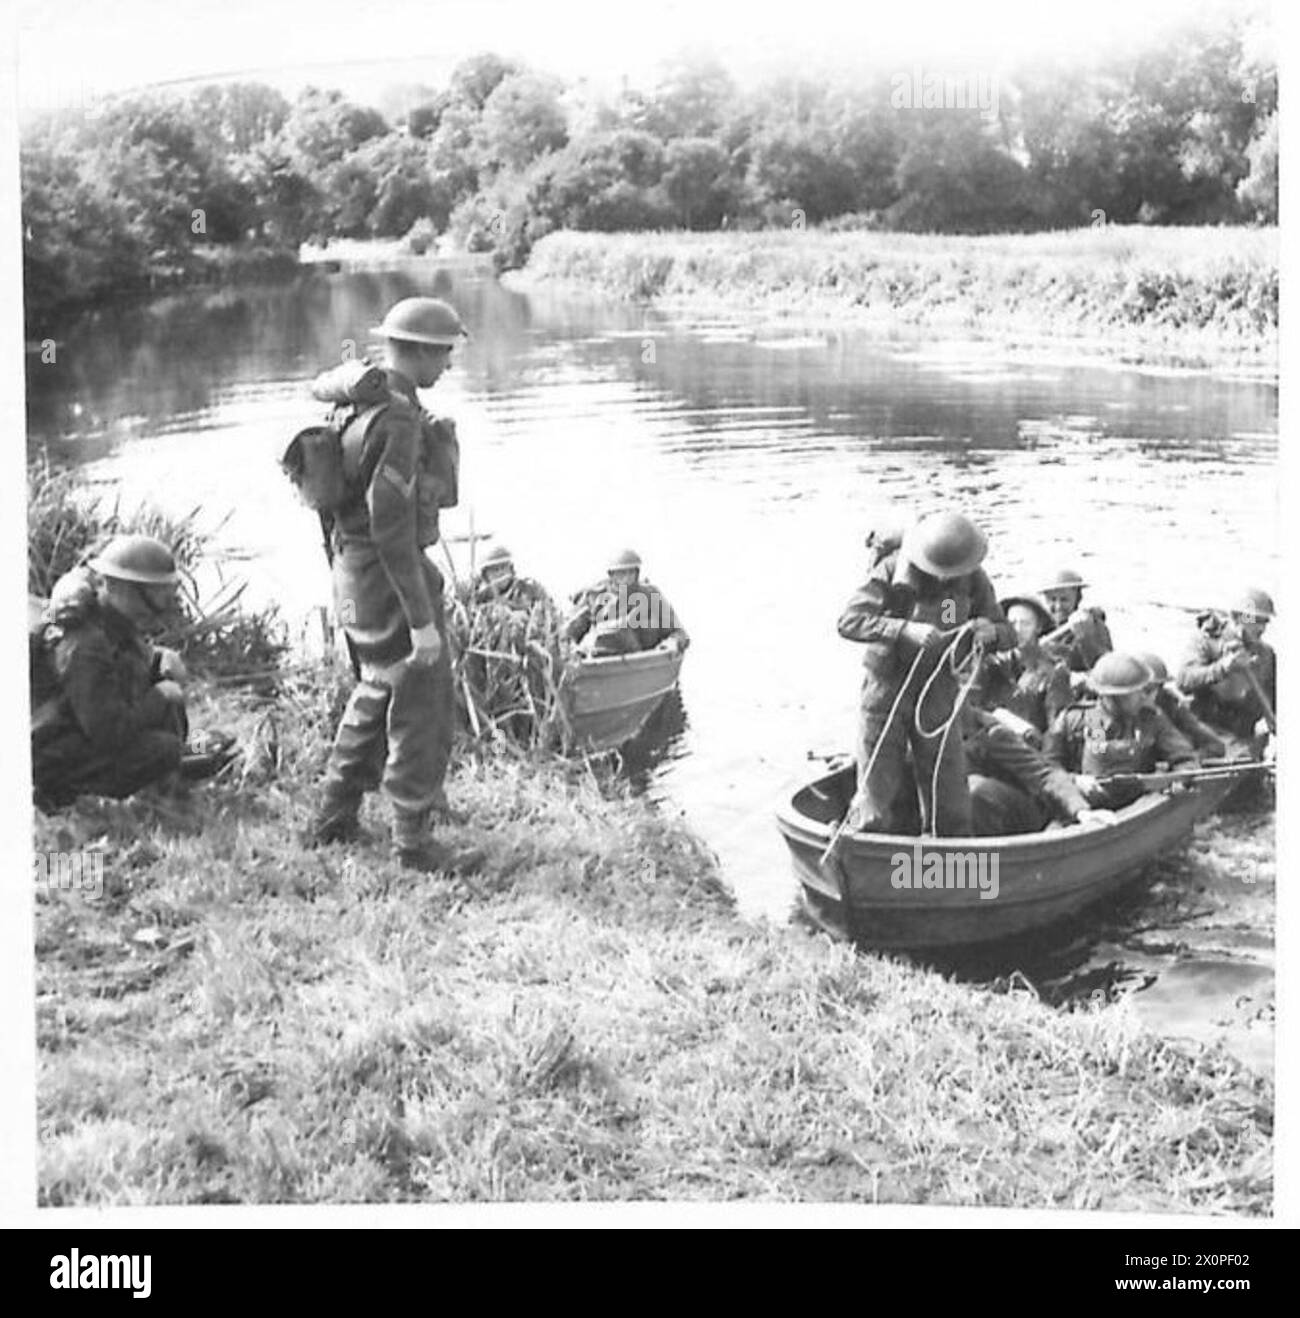 A COMBINED ARMY AND HOME GUARD EXERCISE - Home Guards embarking under the watchful eye of the Royal Marines who were in charge of the embarkation of Home Guards to cross the river in assault boats. Photographic negative , British Army Stock Photo